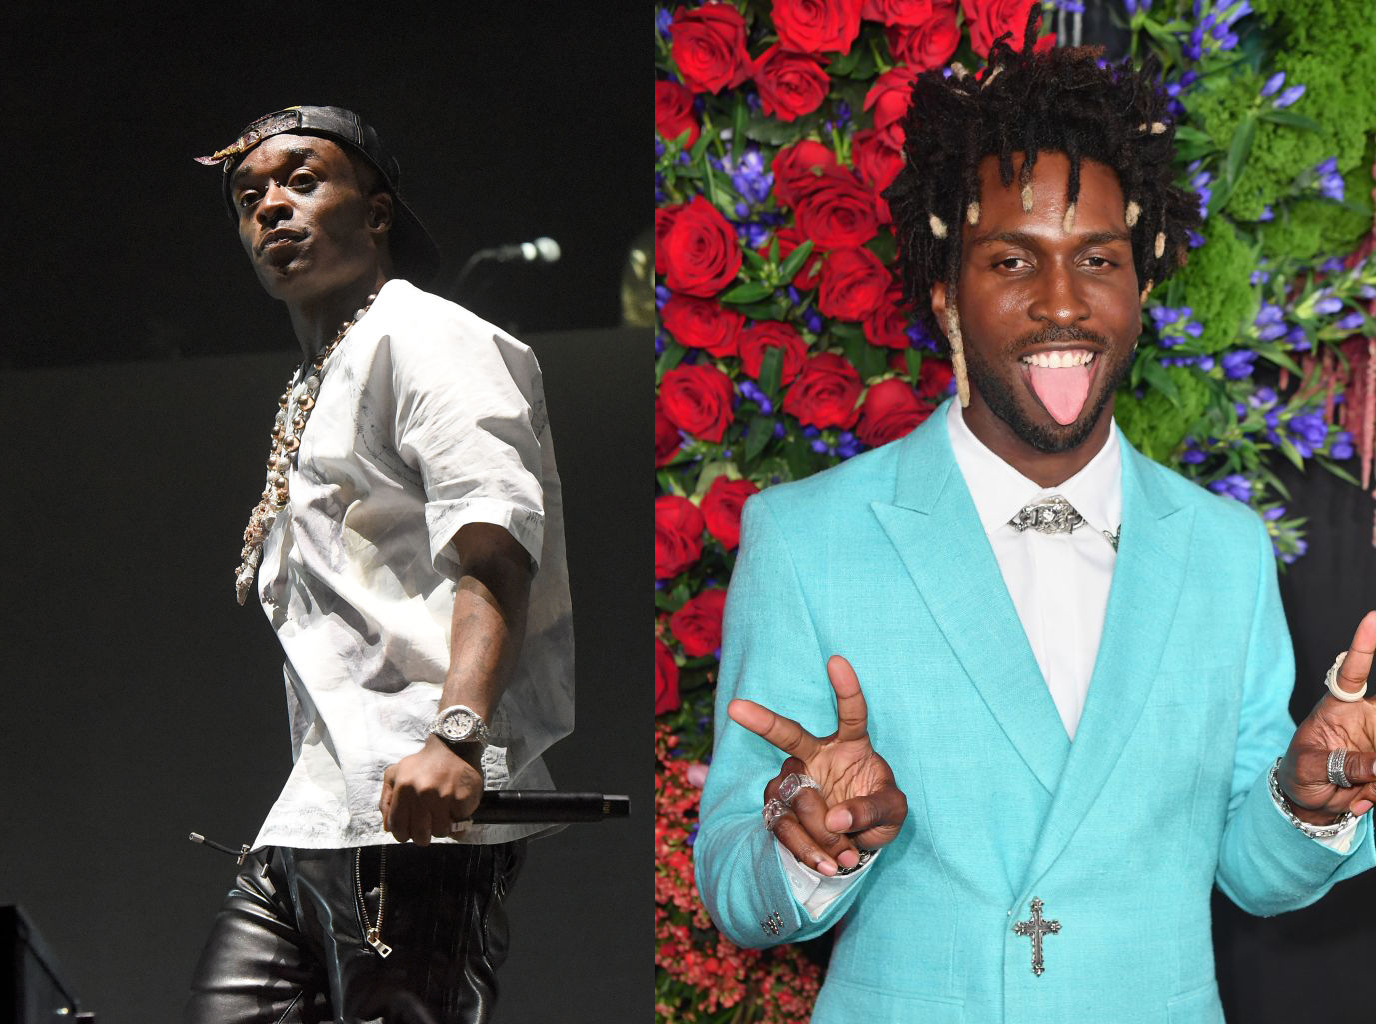 Lil Uzi Vert Catches Ex with SAINt JHN, Rapper Threatens To Use Gun on Bystanders [FULL STORY]